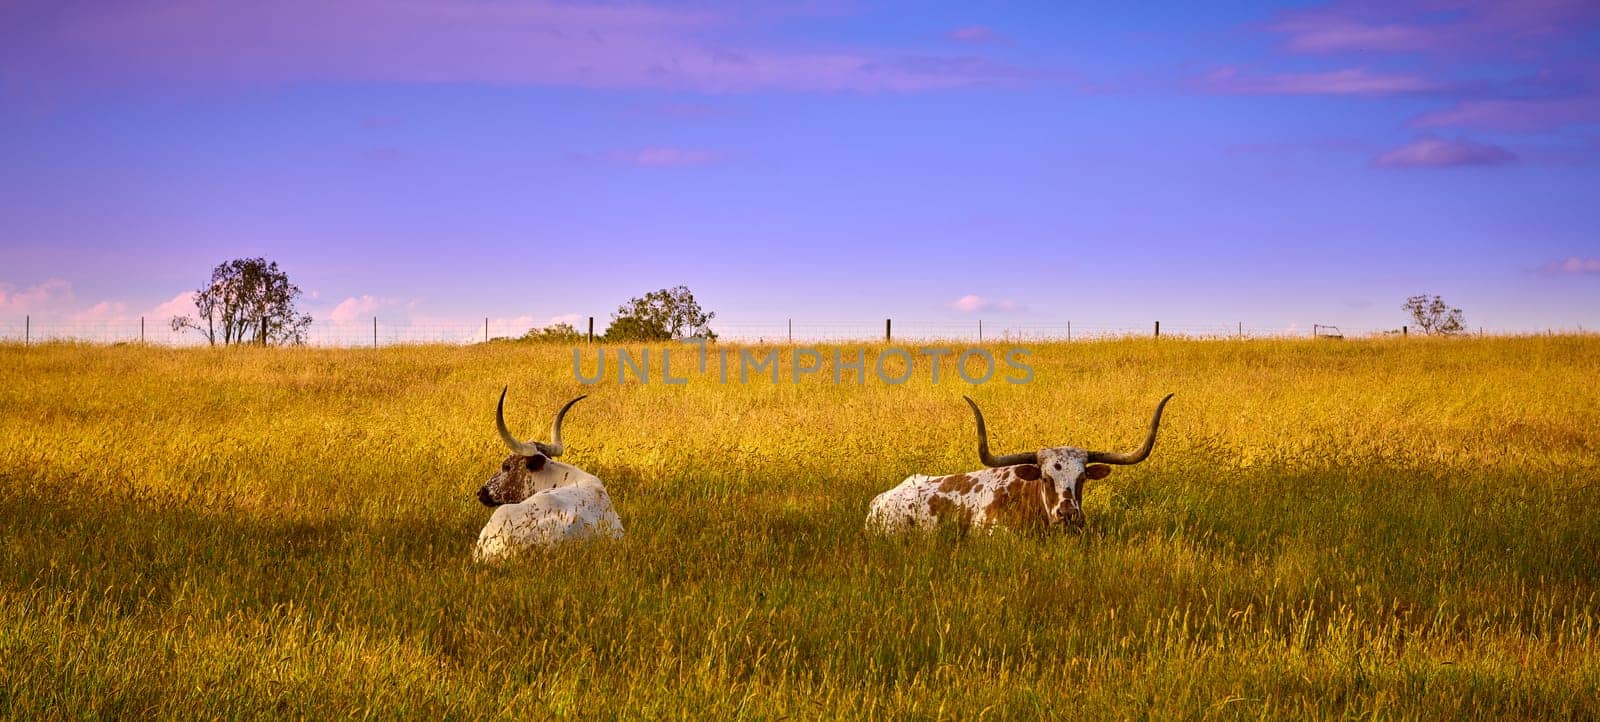 Two Texas Longhorn cattle laying in a field. by patrickstock